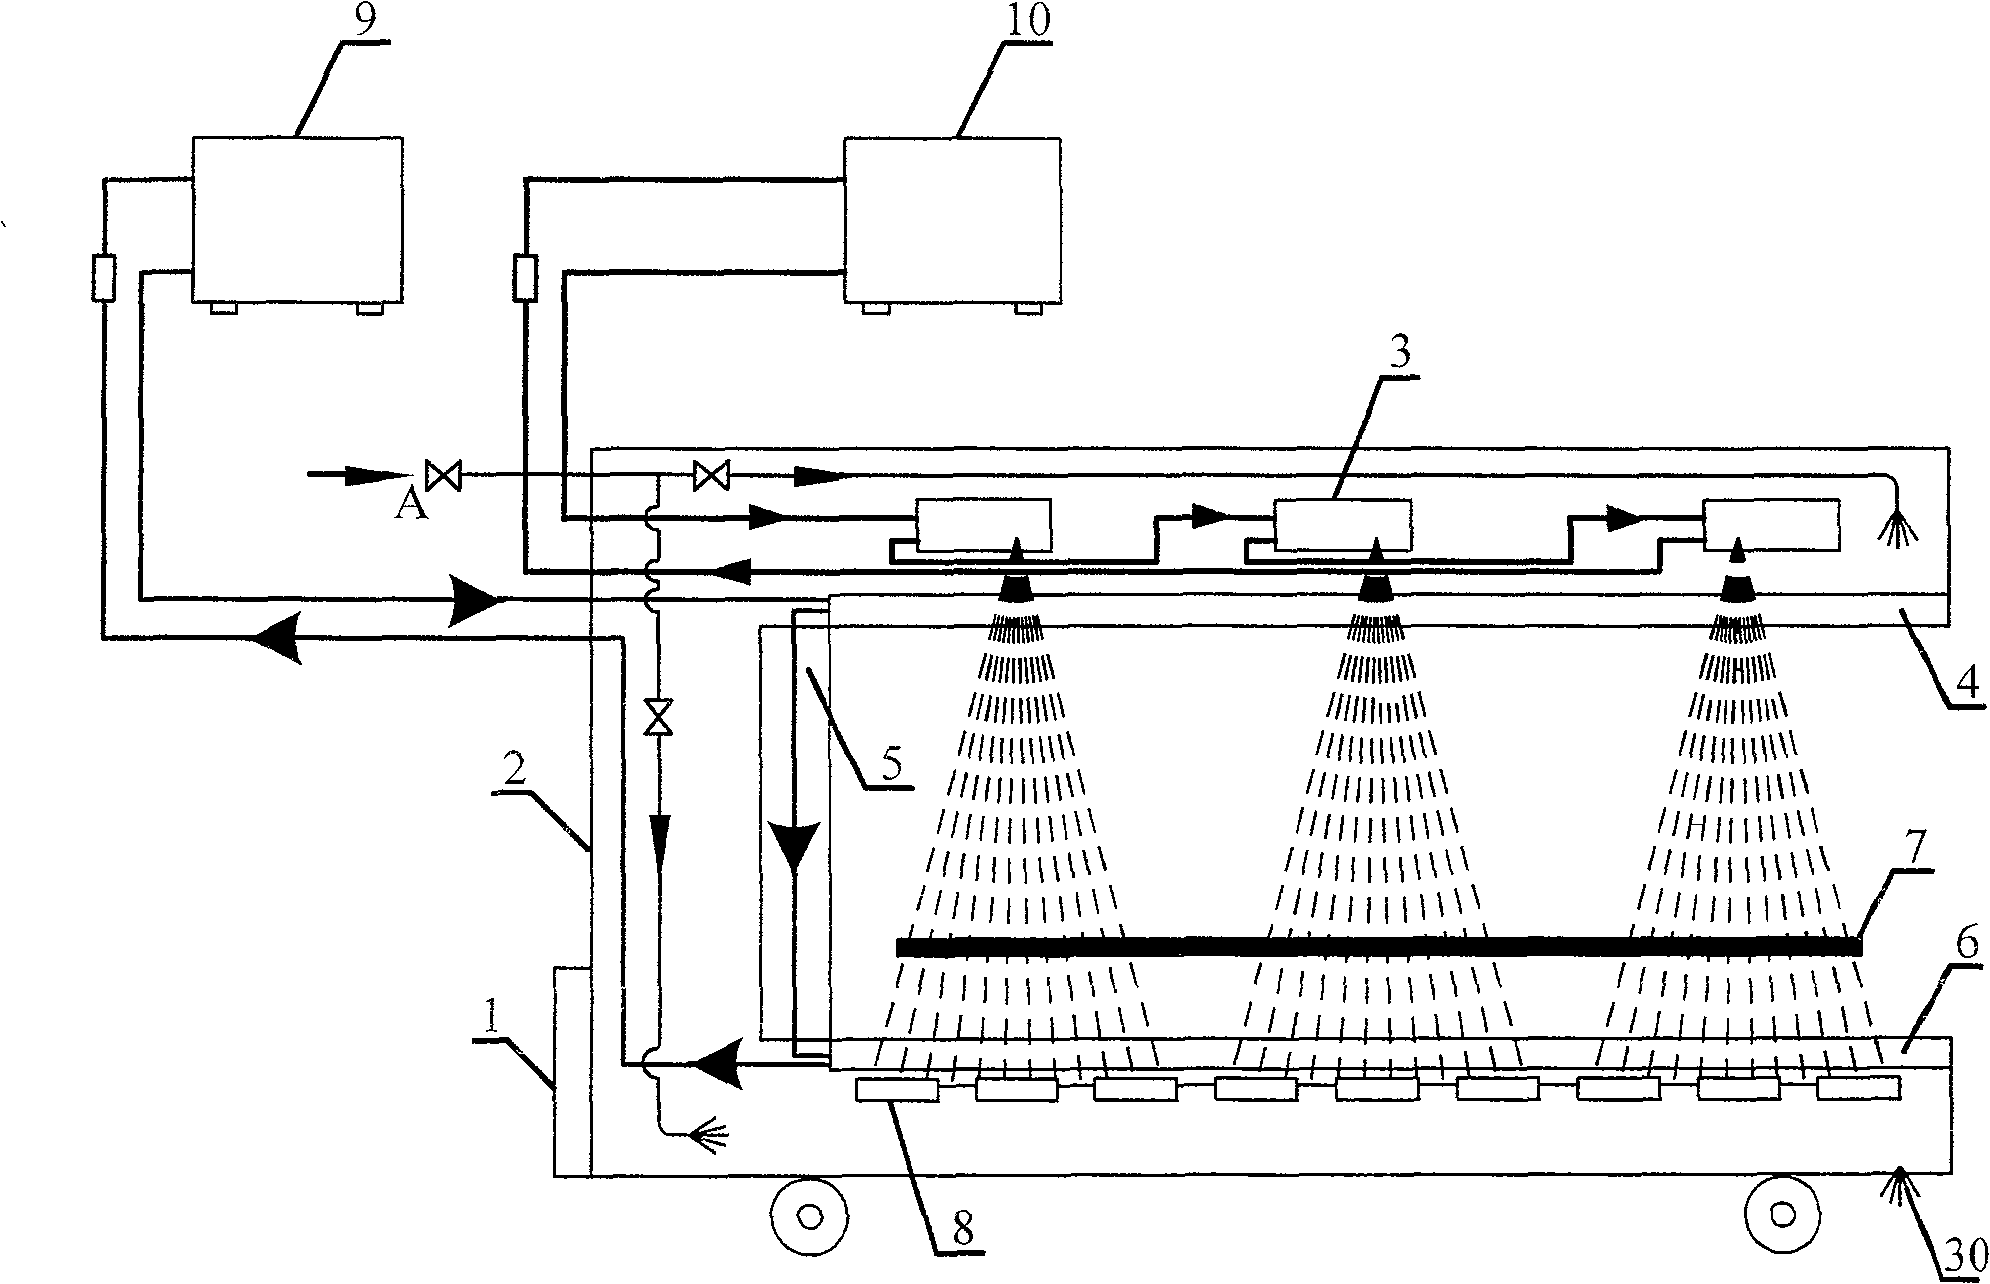 Cooling system of apparatus for measuring thickness / convexity